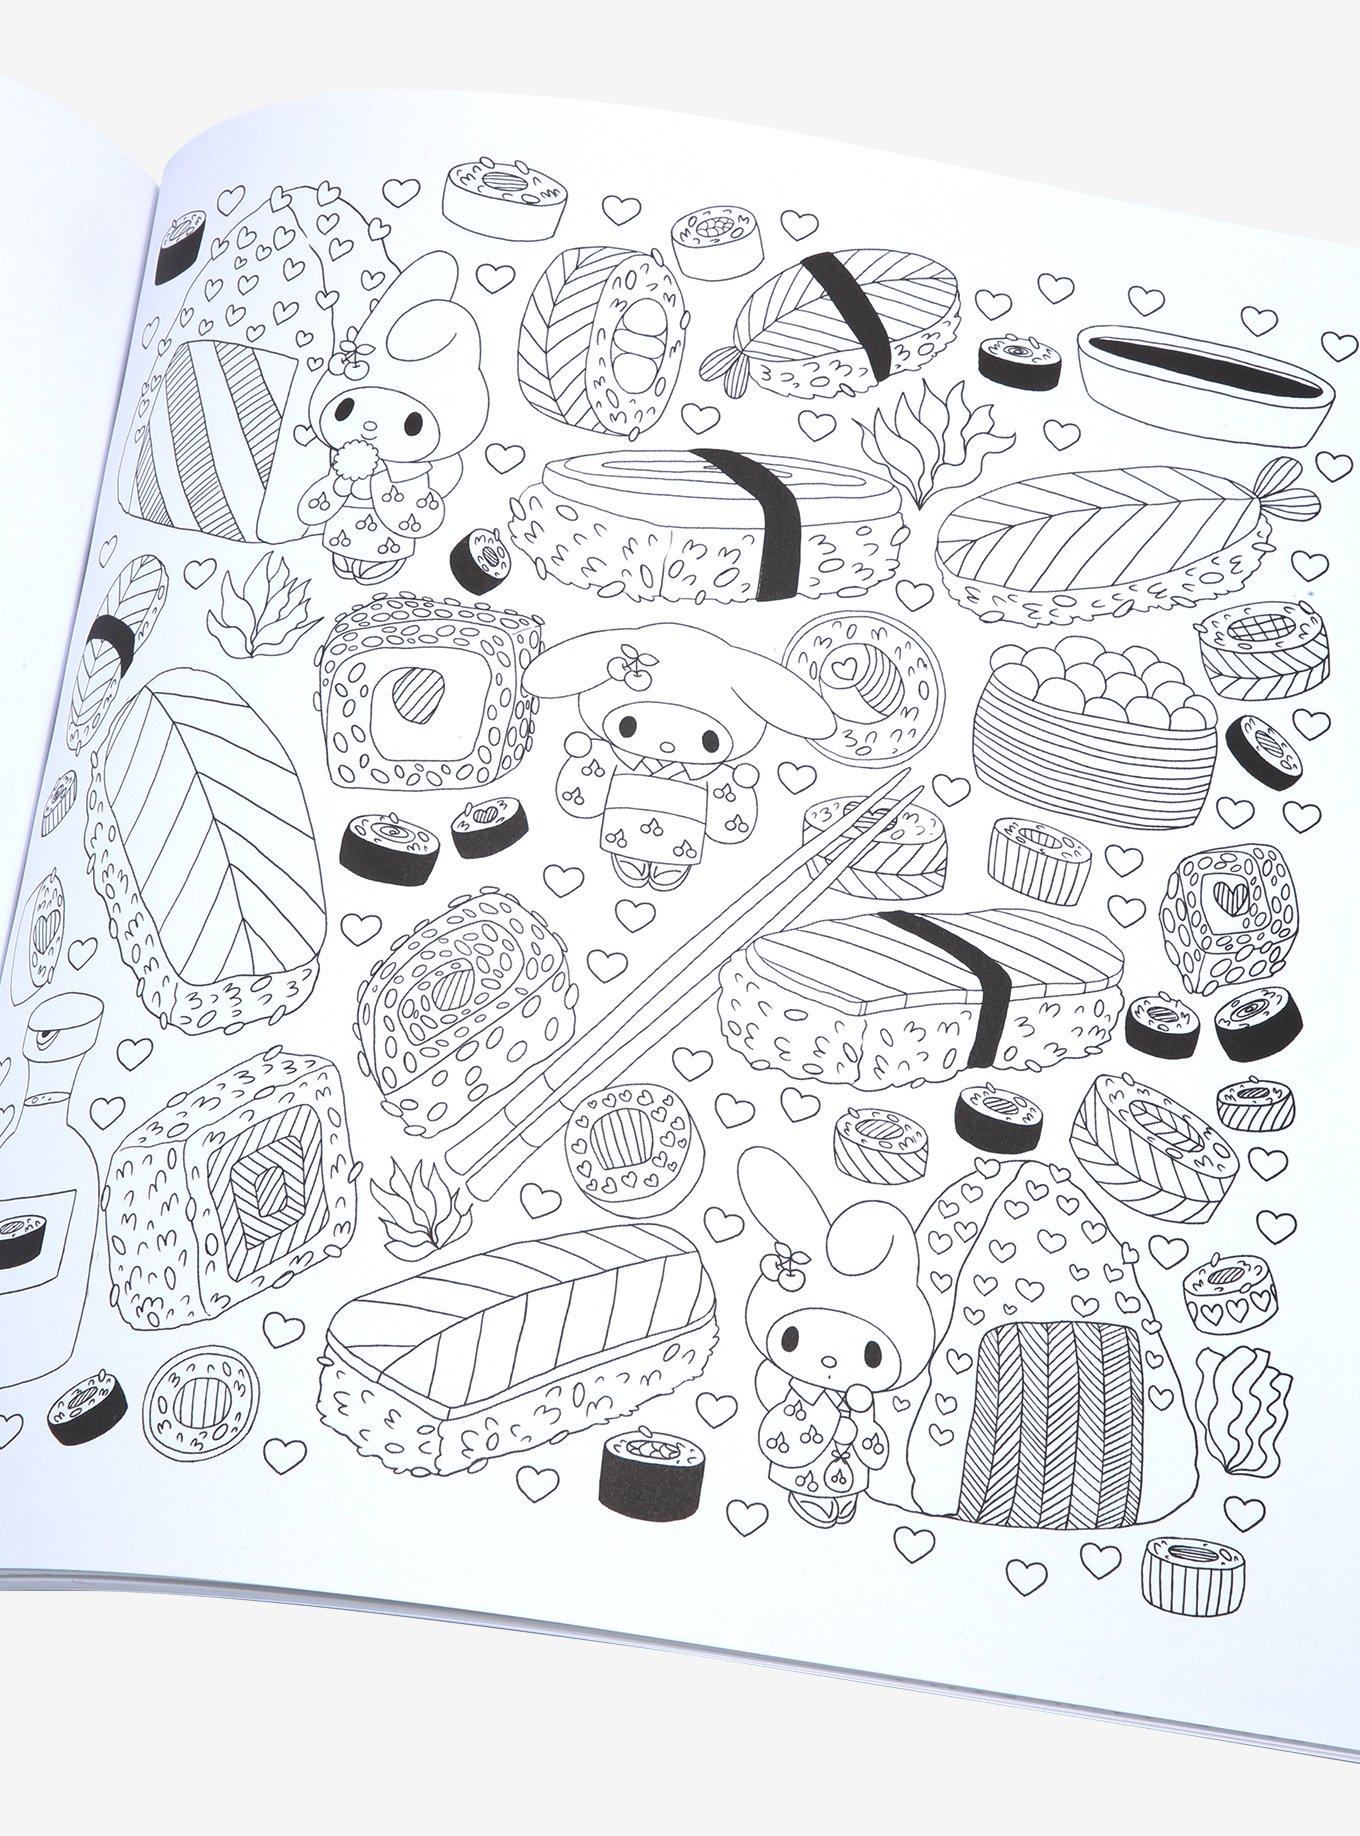 Sanrio Coloring Book: Collection Adults Coloring Books Color To Relax :  Simpson, Kasper: : Books